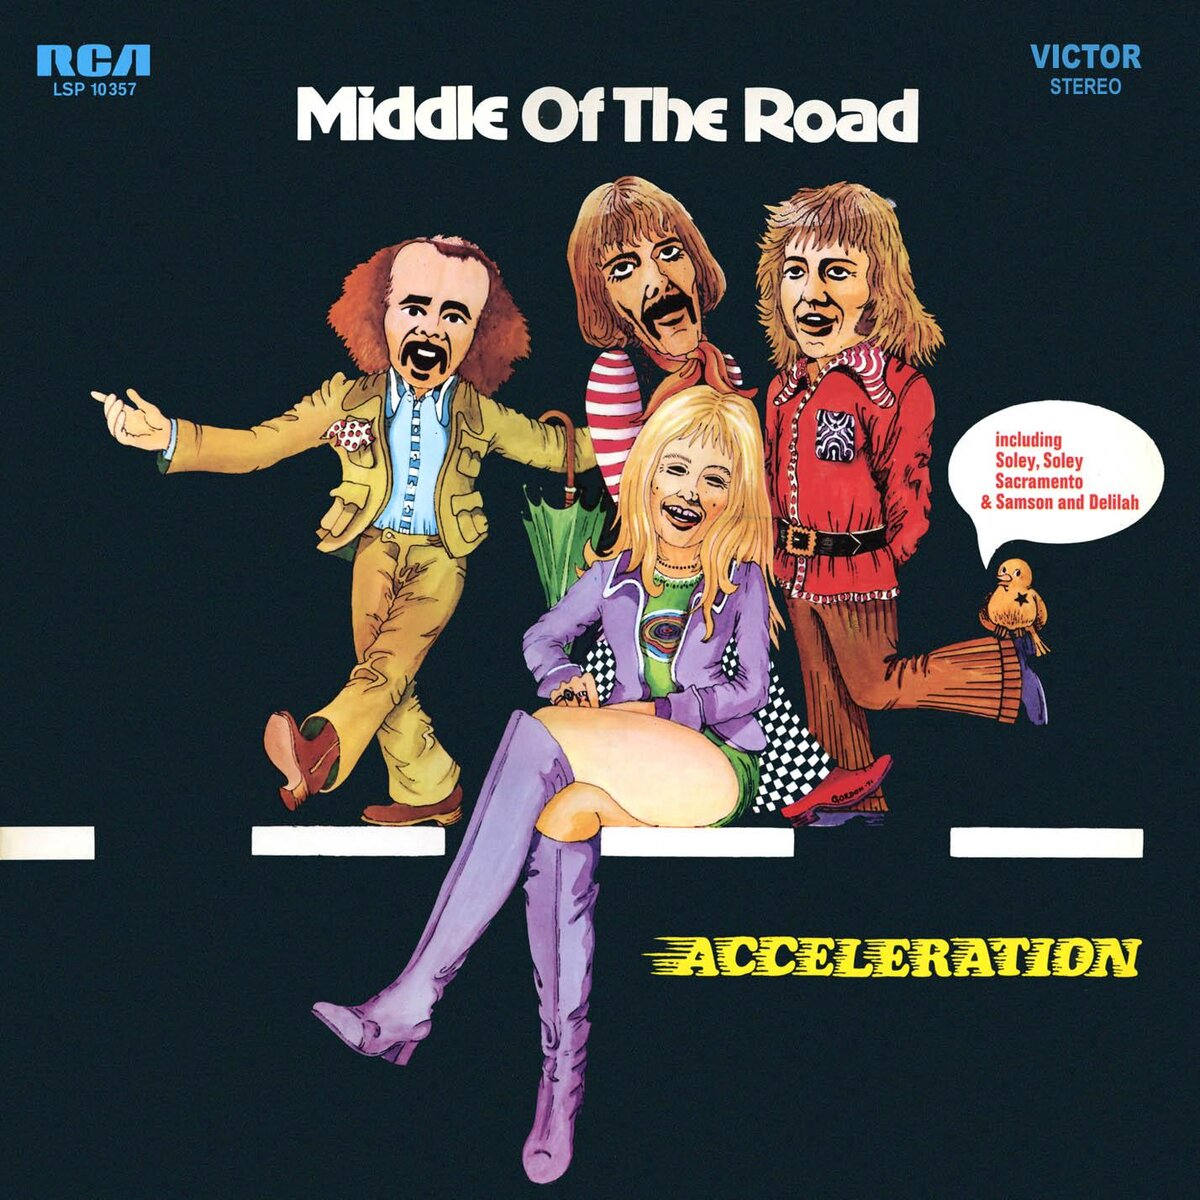 Middle of the road mp3. Middle of the Road Acceleration 1971. Middle of the Road 1971 Middle of the Road обложка. Обложки пластинок. Middle of the Road обложки альбомов.